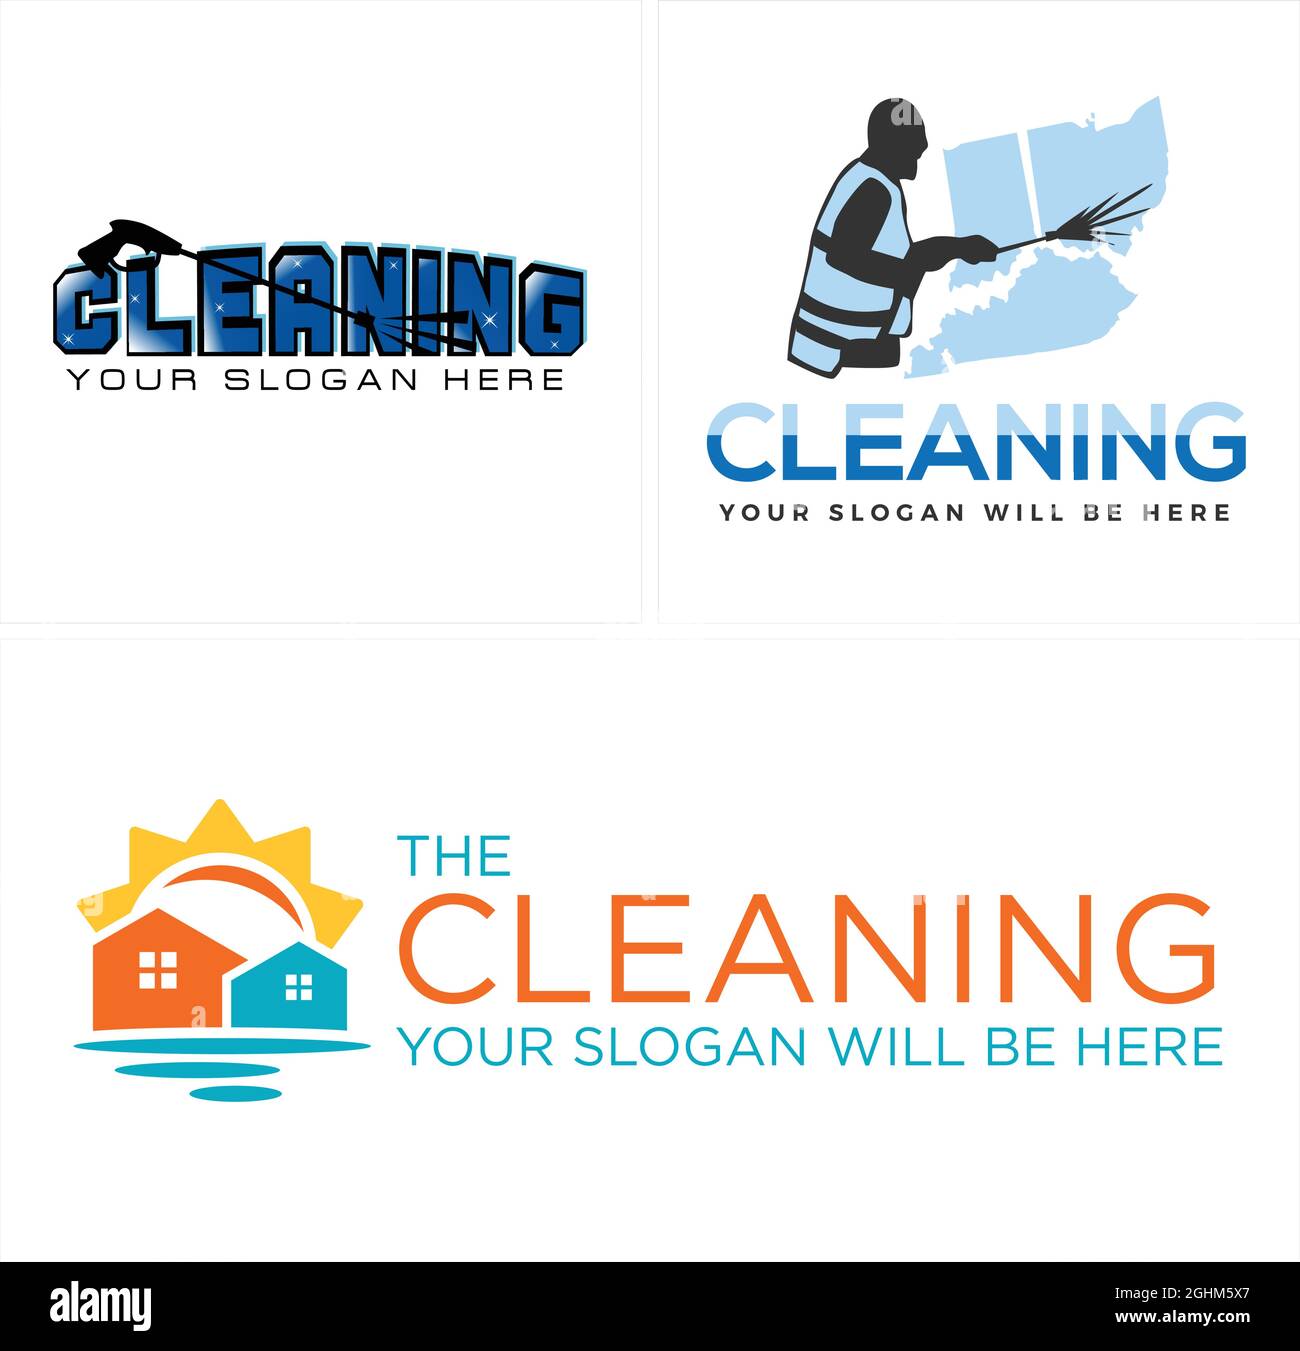 Cleaning maintenance home service logo design Stock Vector